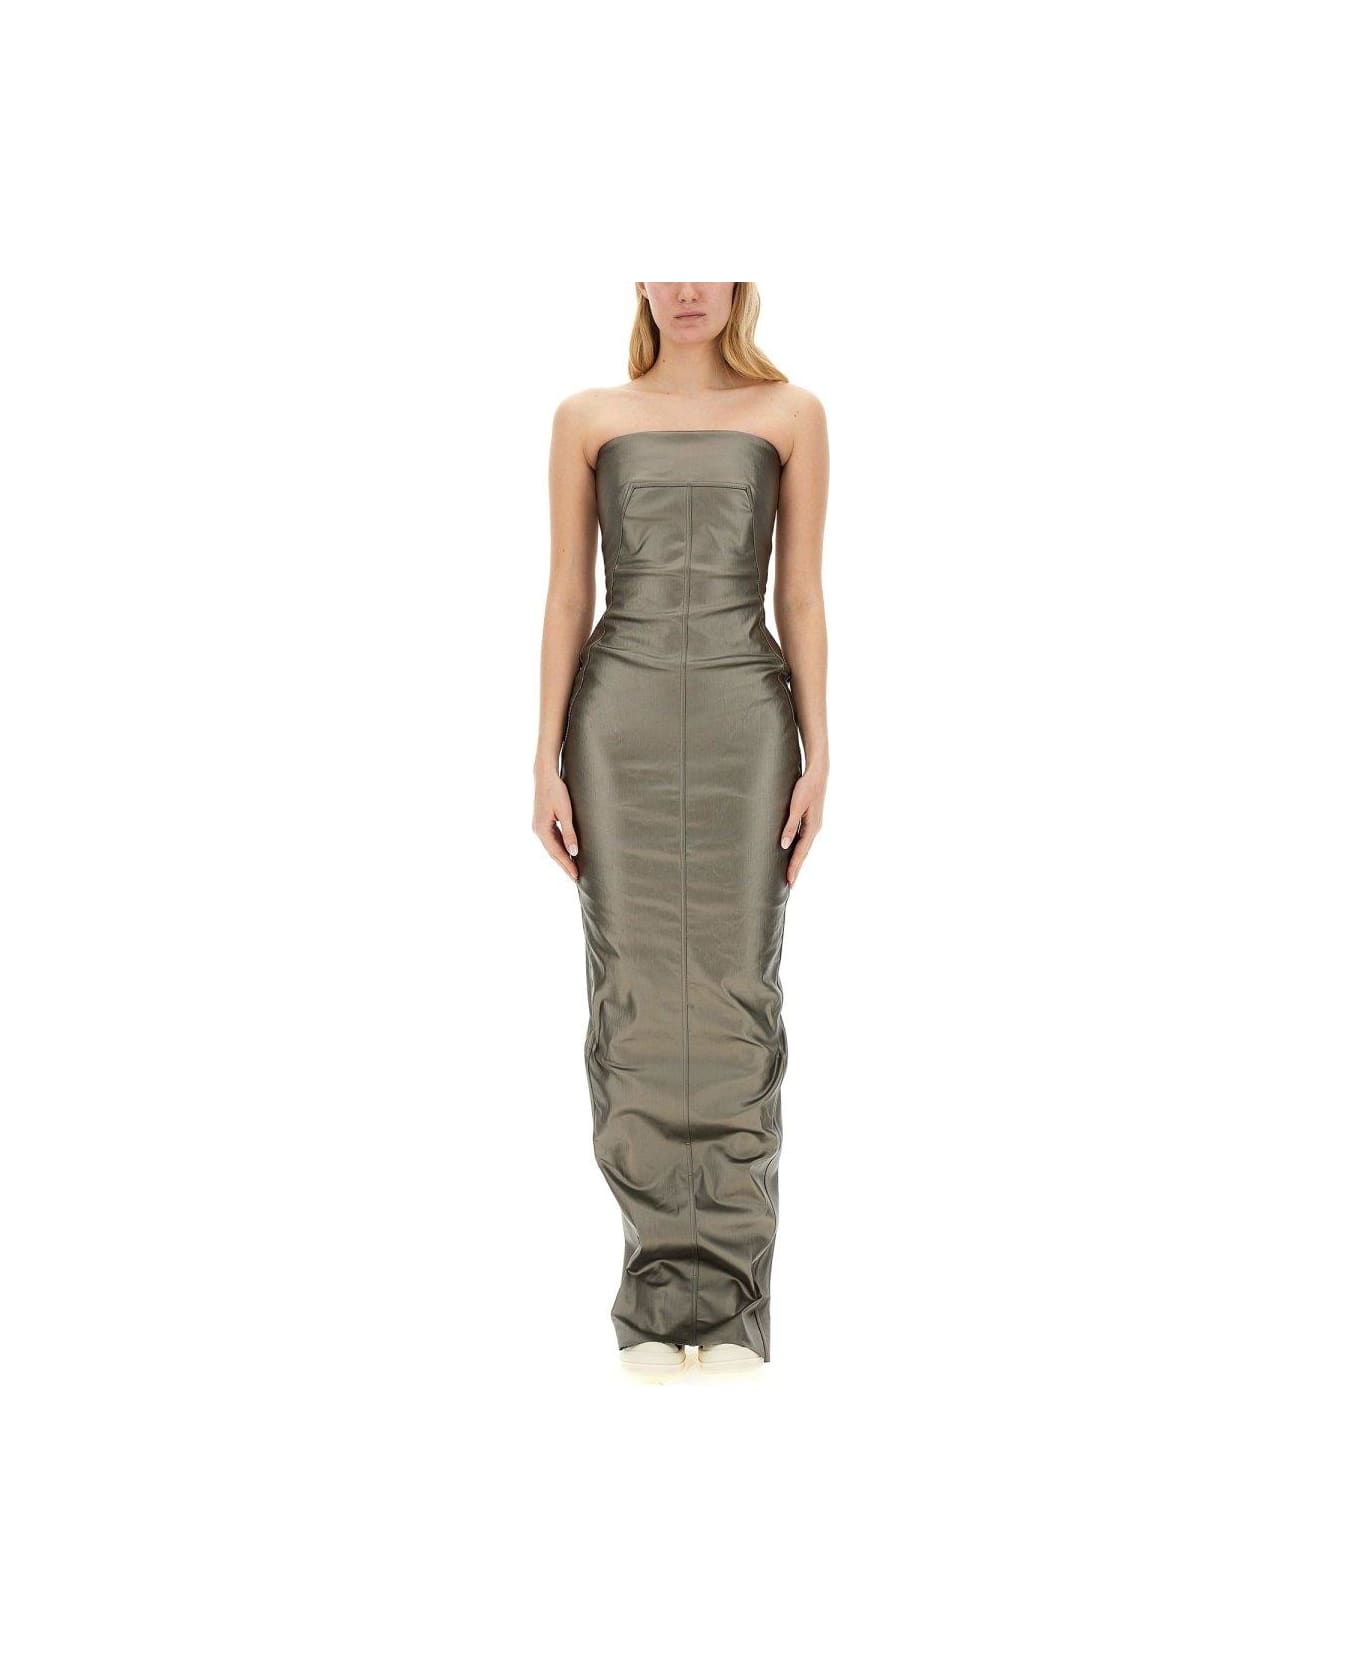 Rick Owens Floor-length Strapless Bustier Gown - GREY